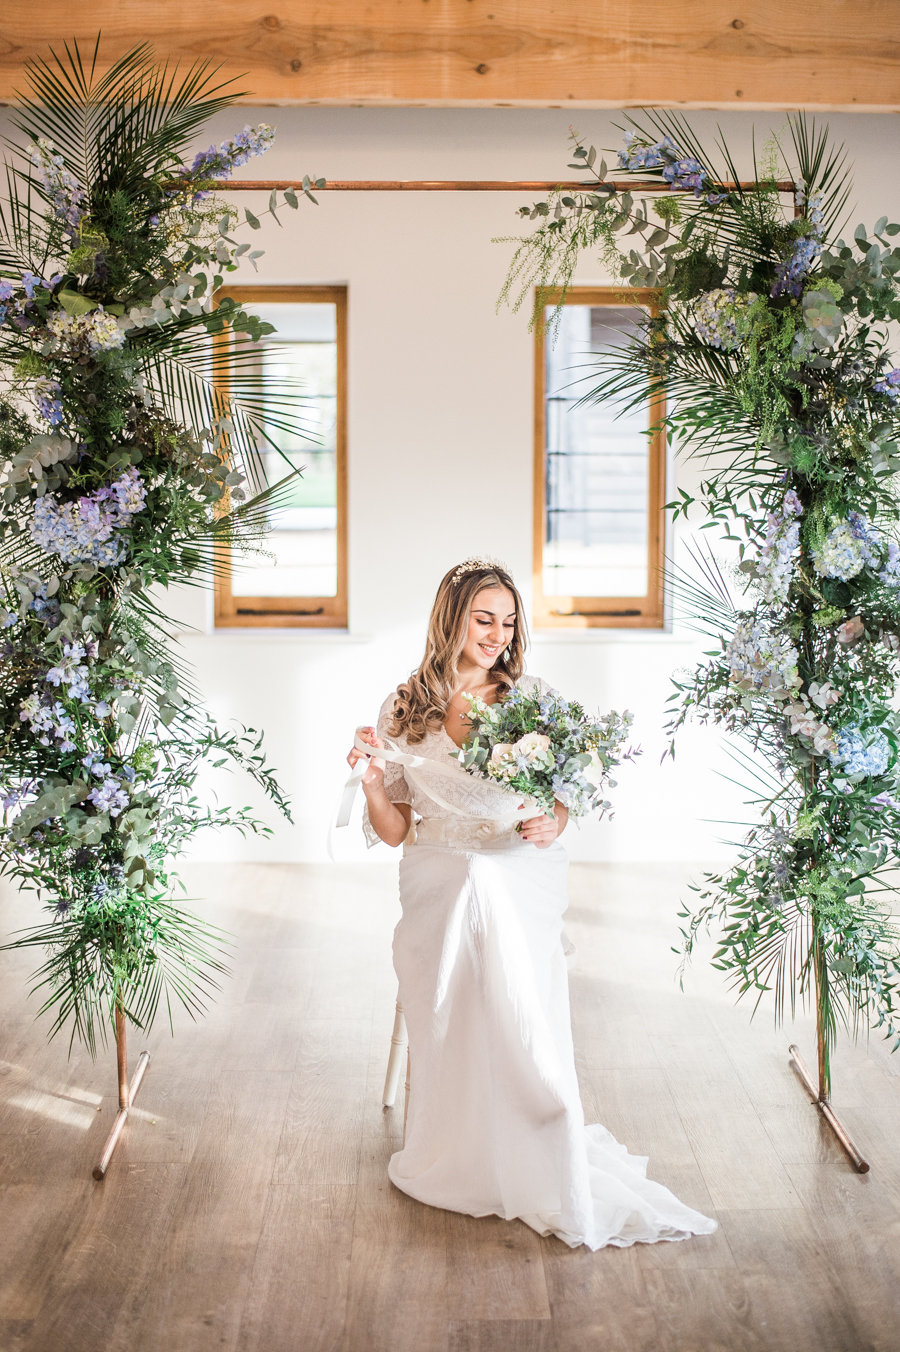 Beautiful blue wedding inspiration for 2021 couples, photo credit Laura Jane Photography (40)